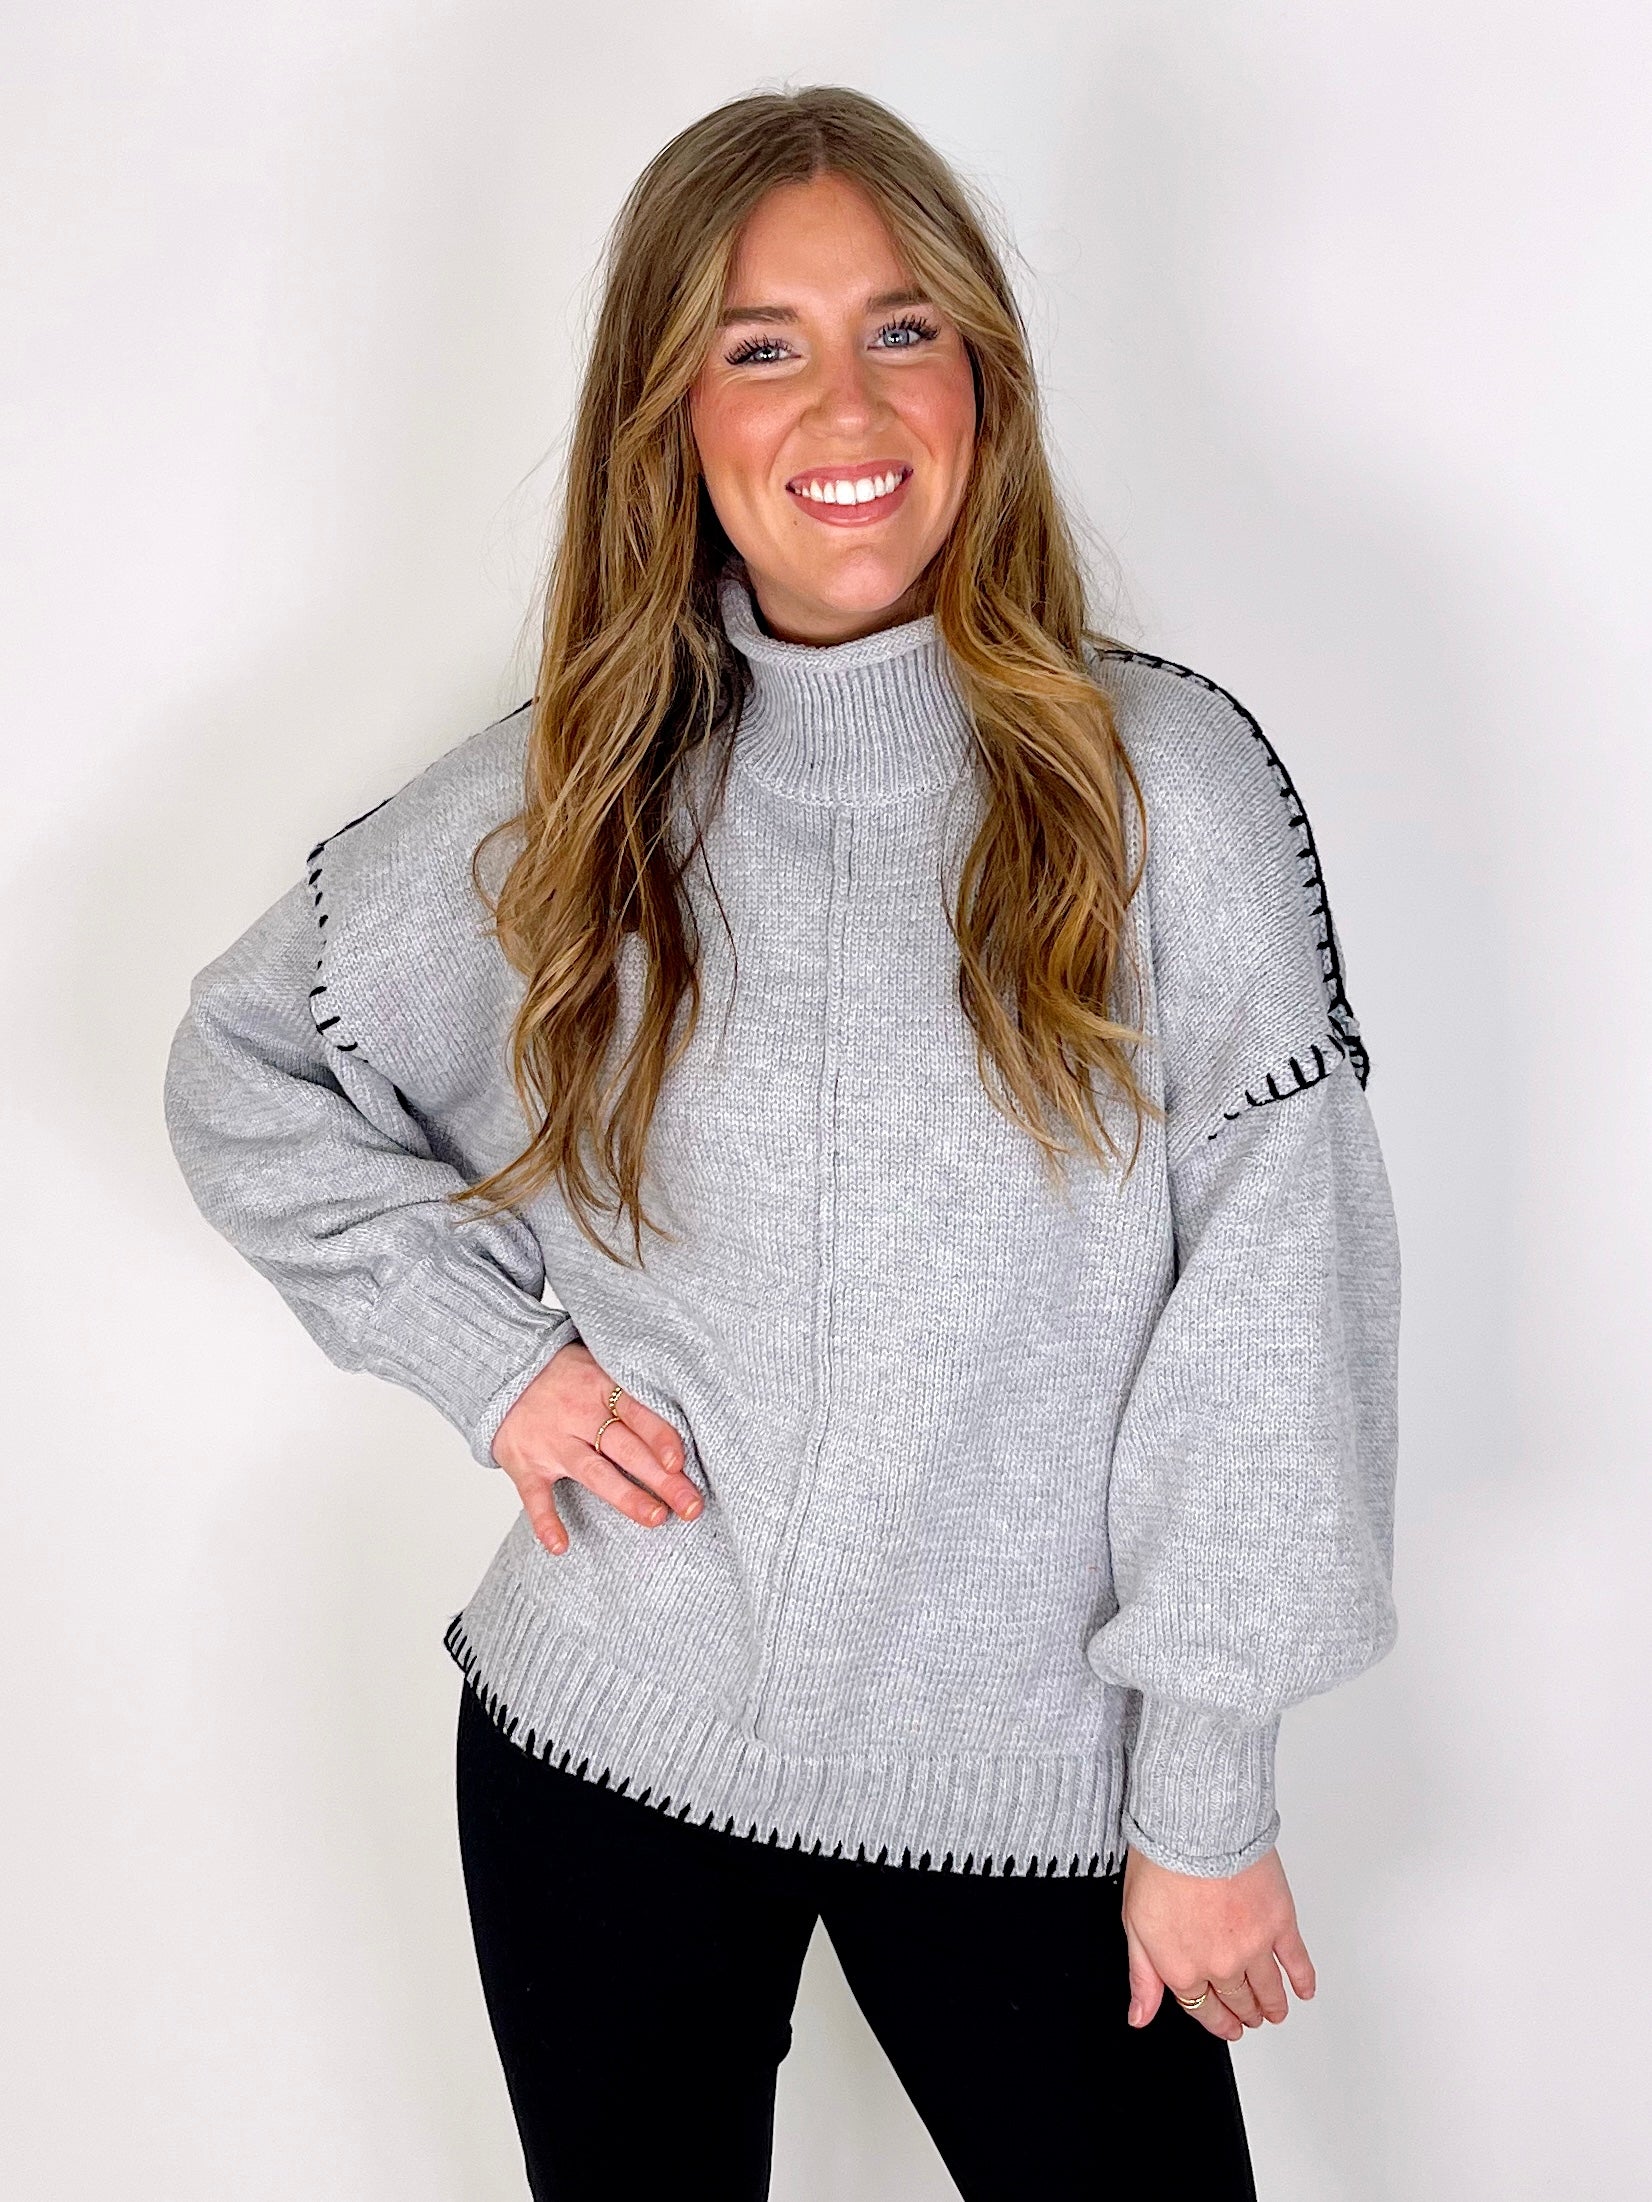 The Melissa Sweater-Sweaters-Anniewear-The Village Shoppe, Women’s Fashion Boutique, Shop Online and In Store - Located in Muscle Shoals, AL.